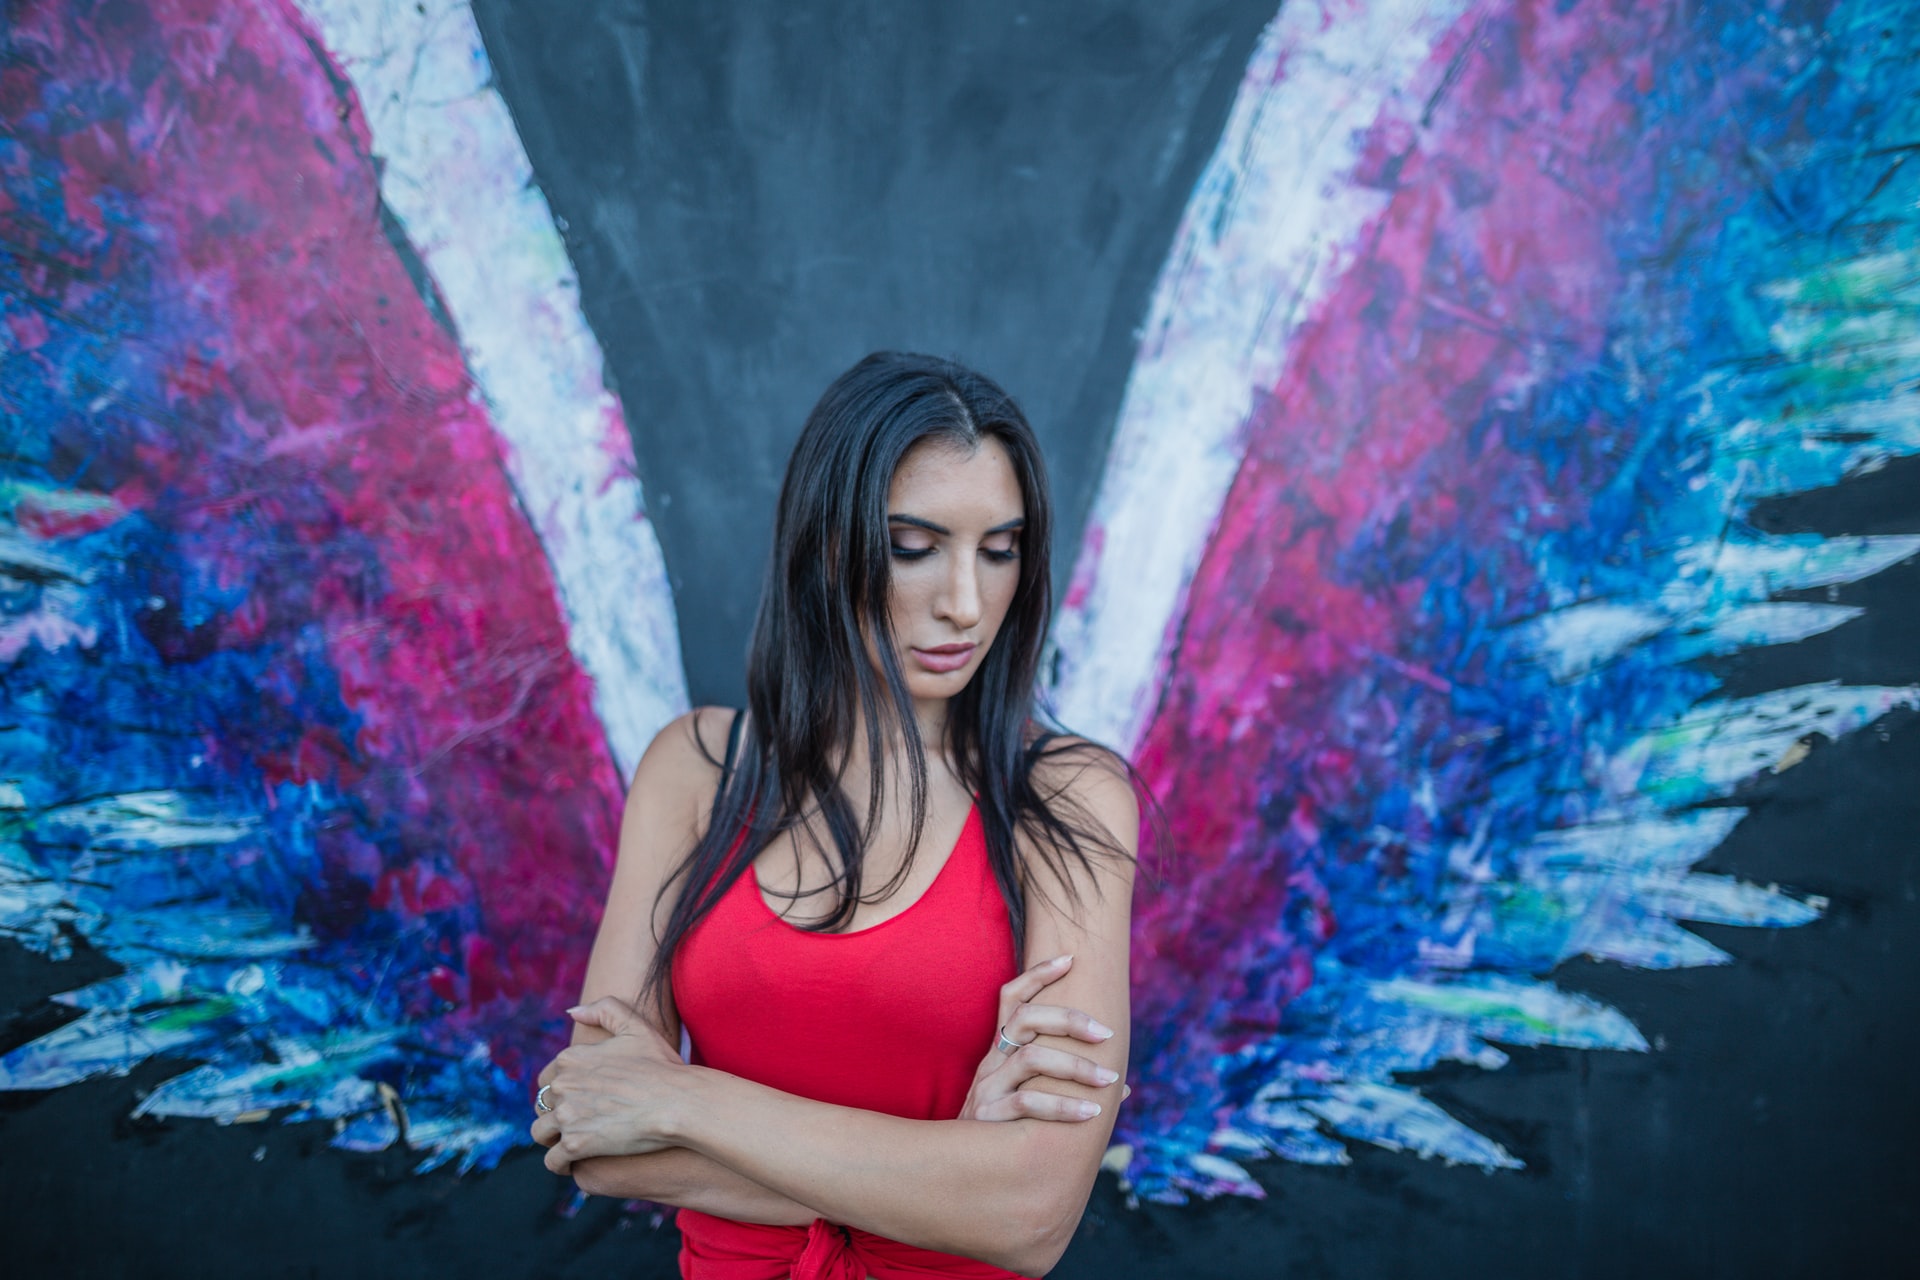 A Woman in Red Skirt Standing Against A Wall With Angel Wings